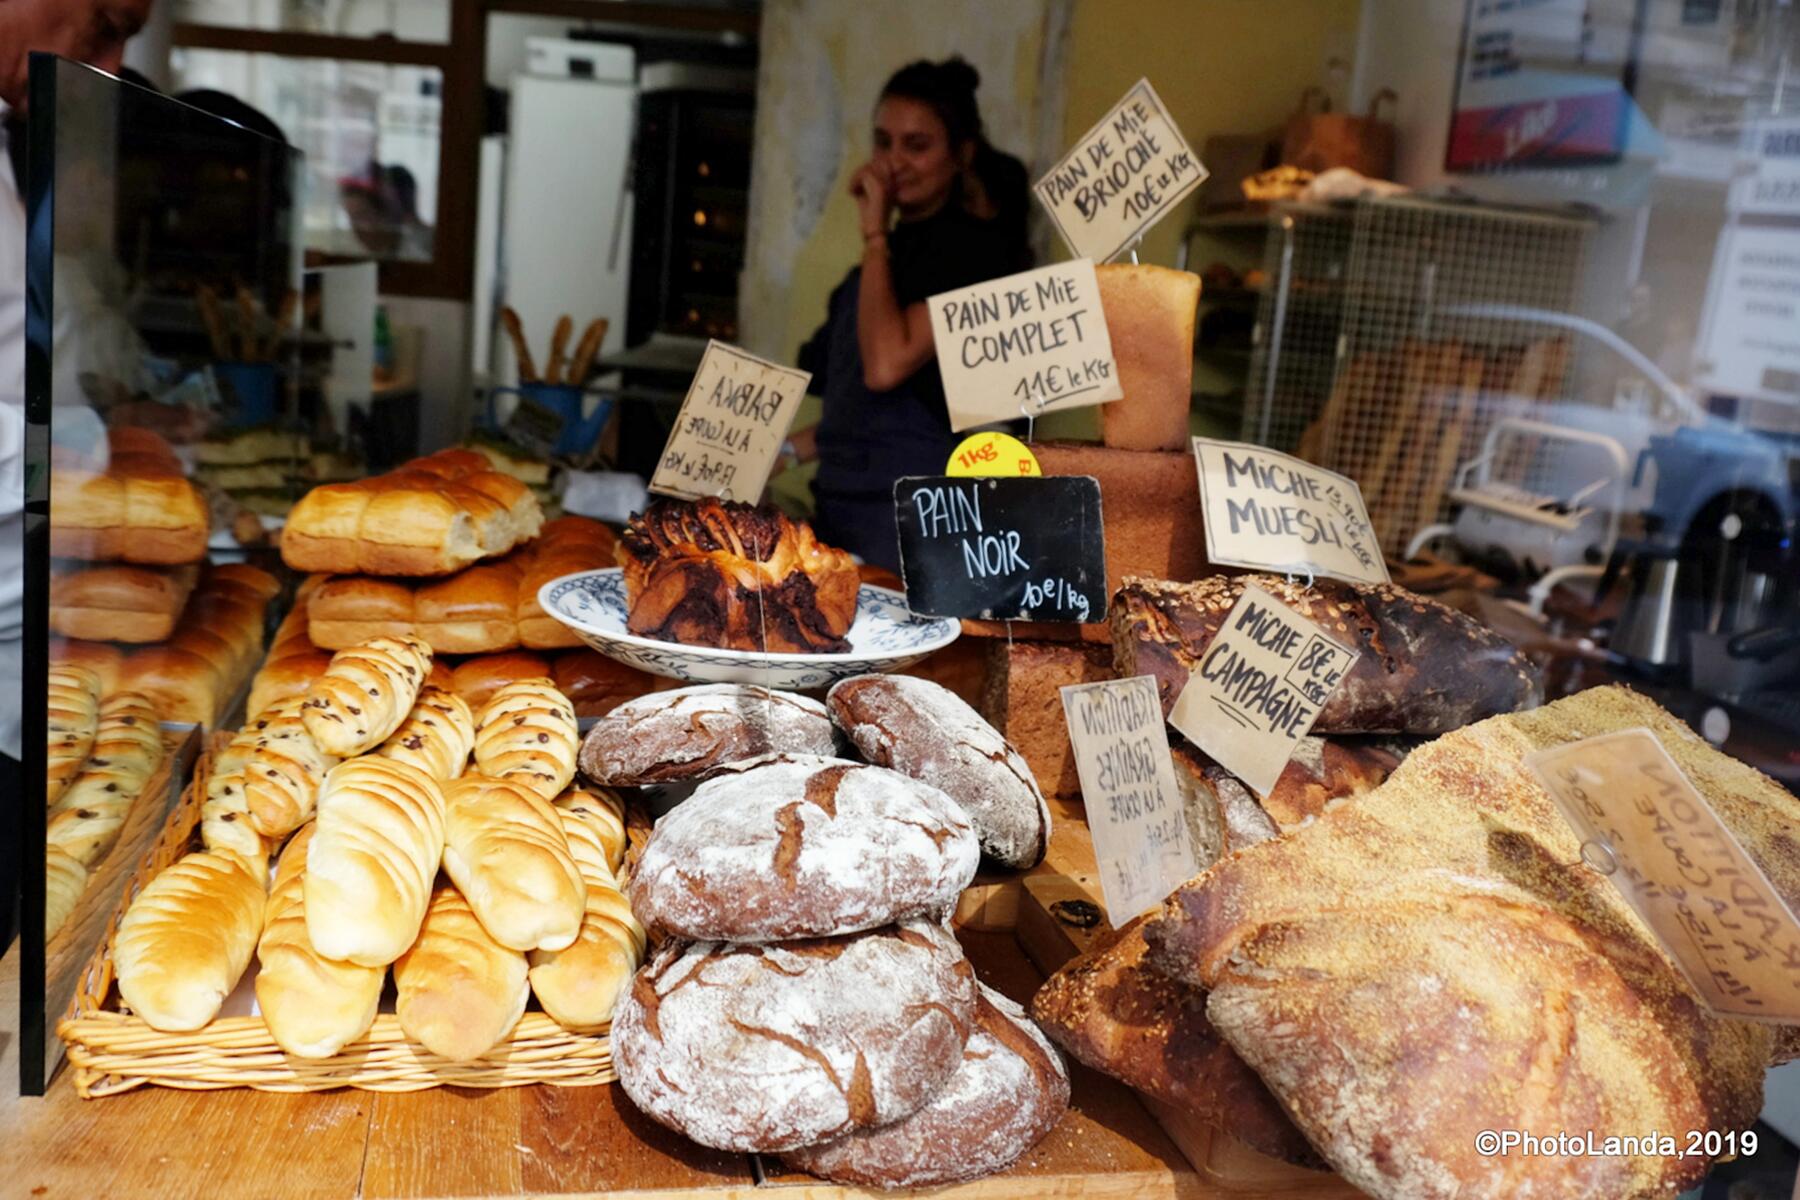 The Best Bakeries in Paris, According to a Local